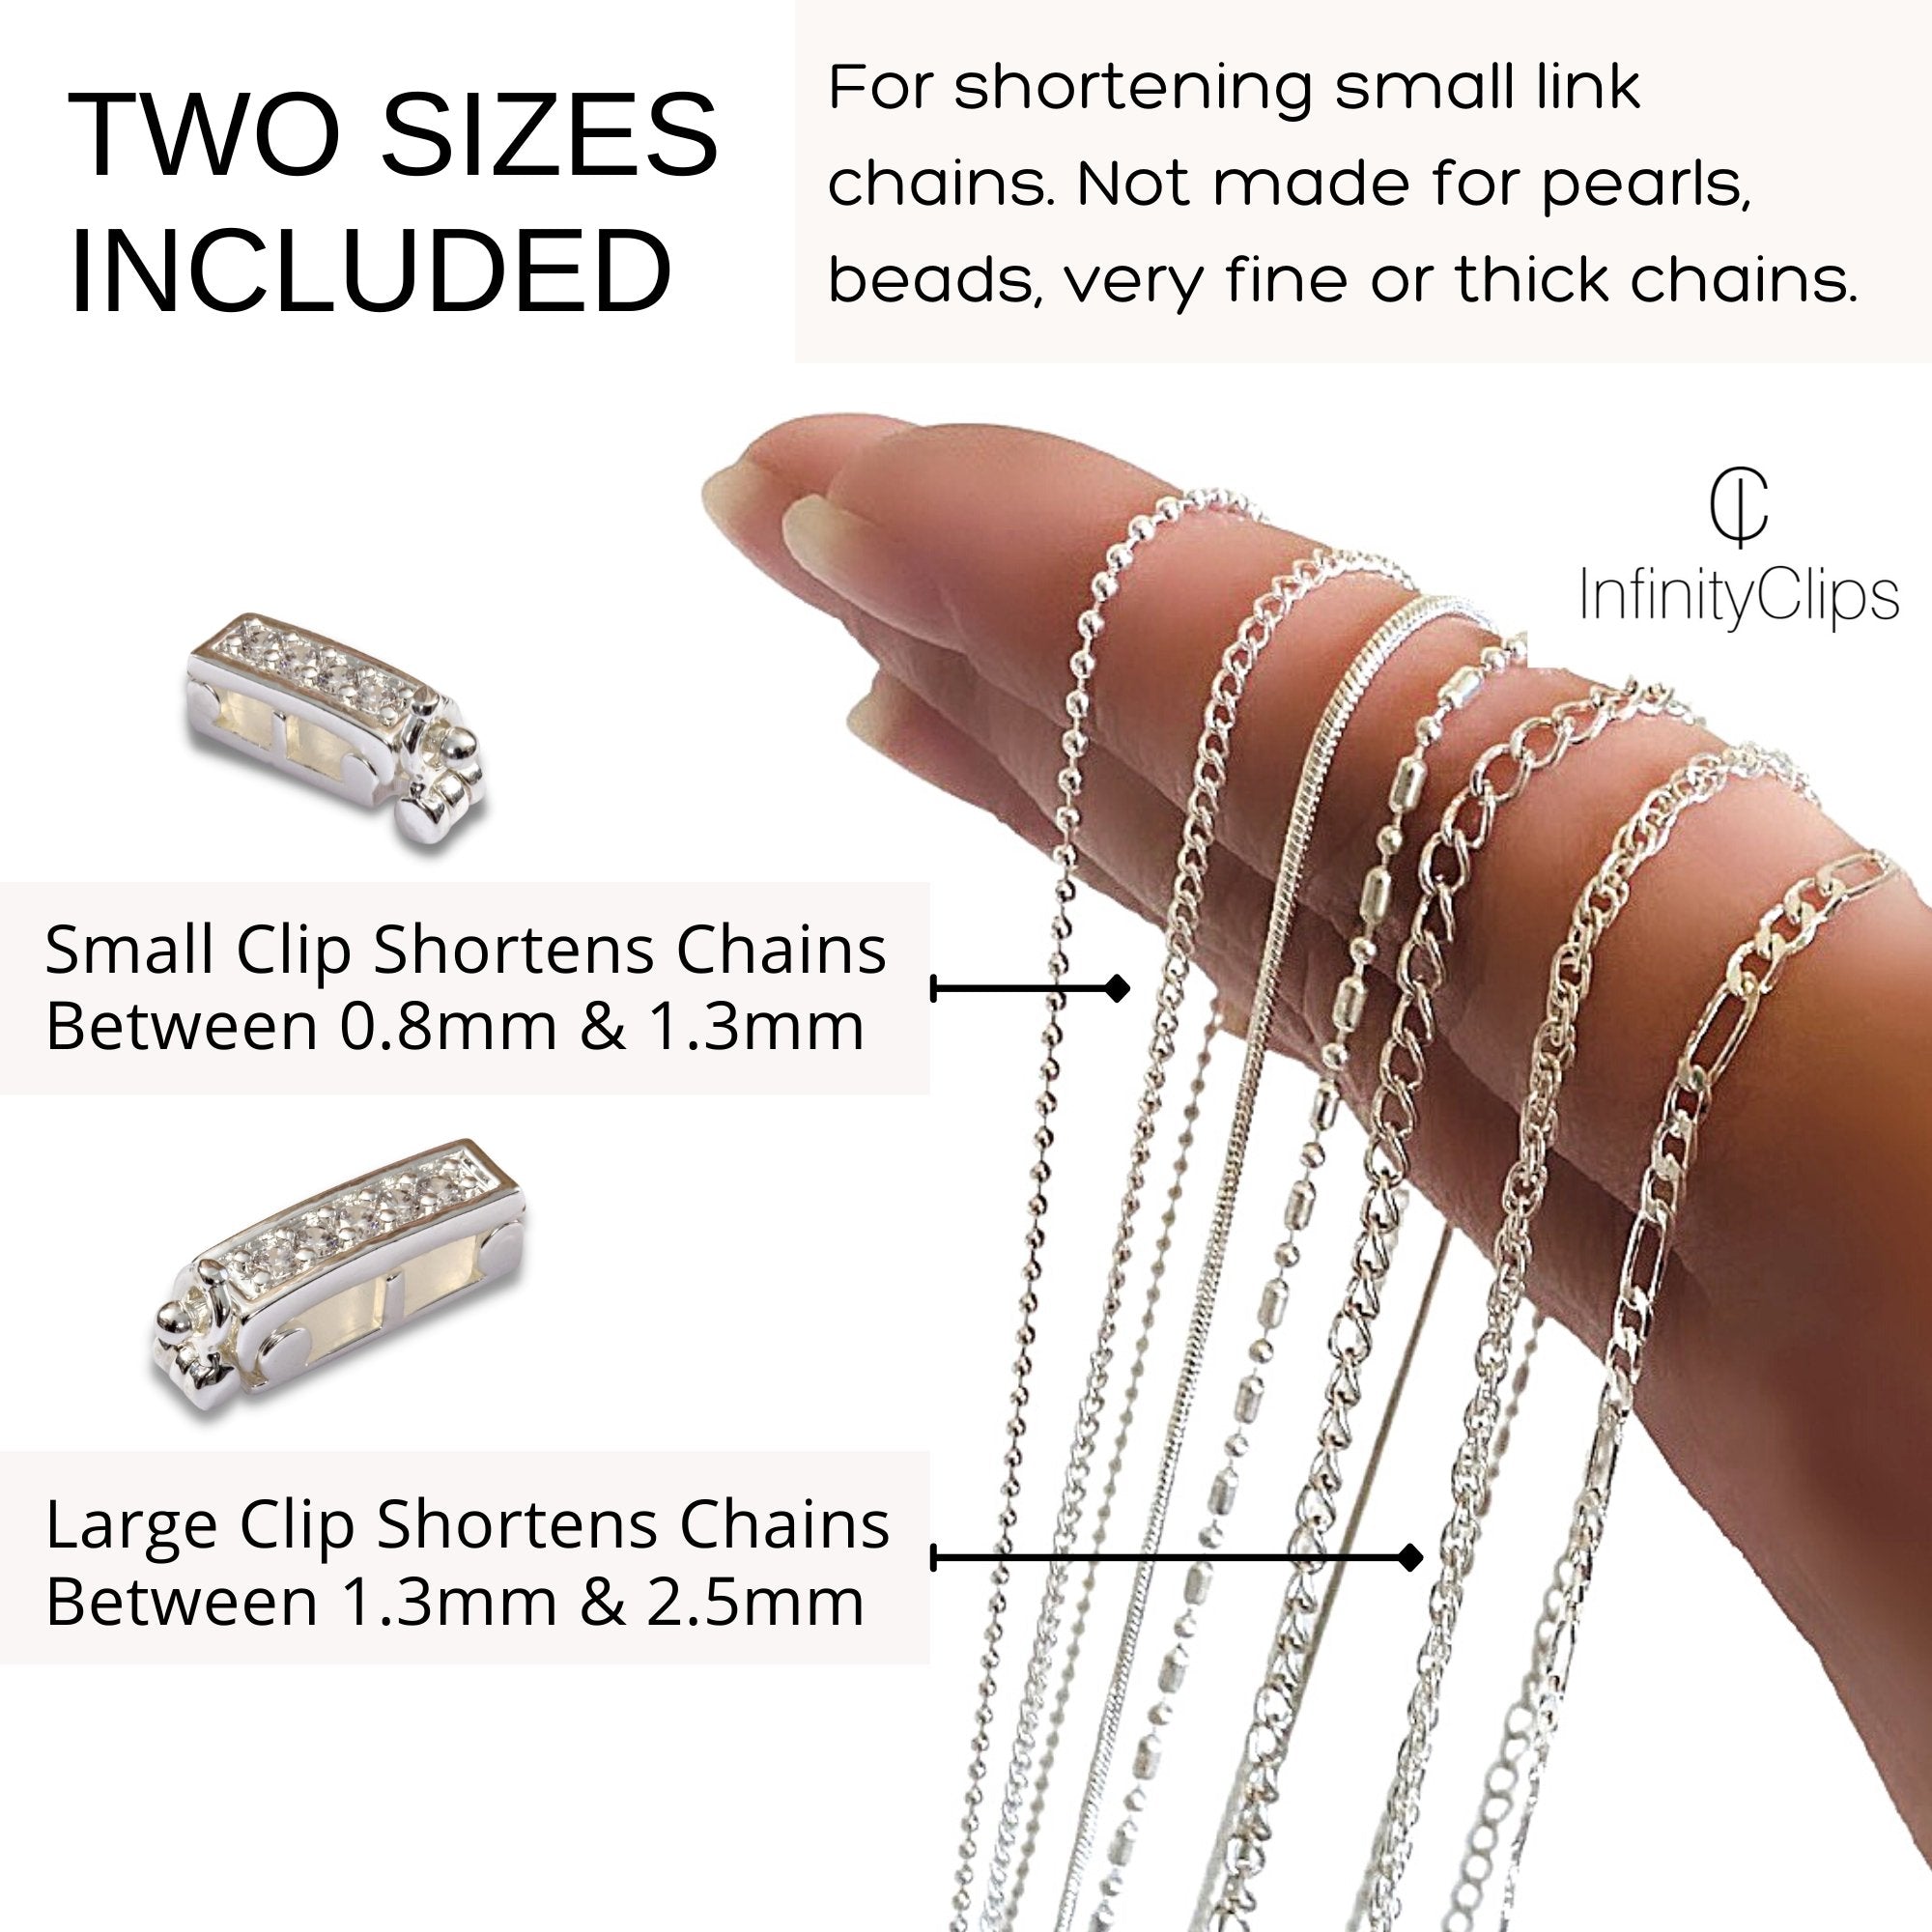 Infinity Clips Necklace Shortener 2 PC Set for Thin Chains 18K Gold Plated Brass Necklace Shortener Clasp with Cubic Zirconia Accents